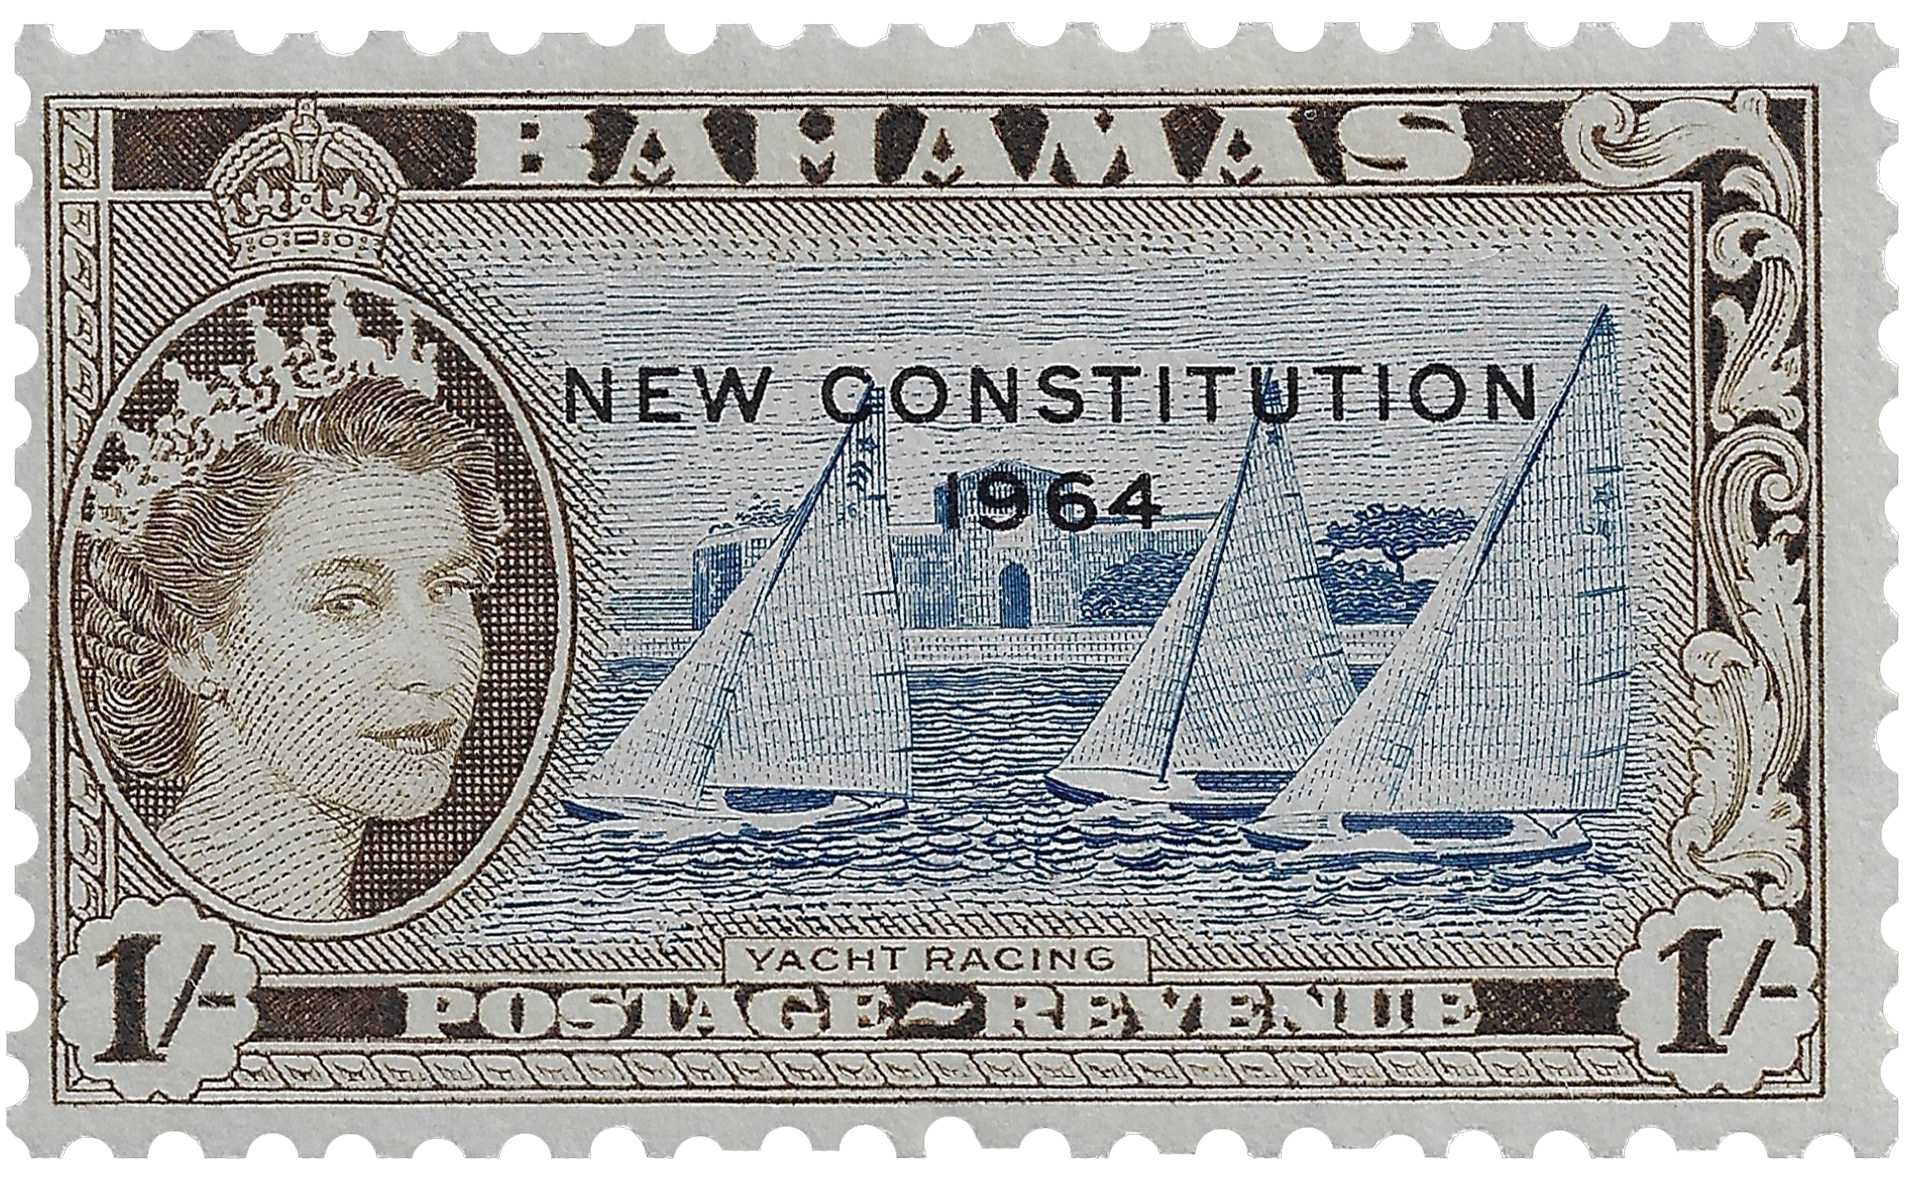 1s 1964, Yacht Racing, New Constitution